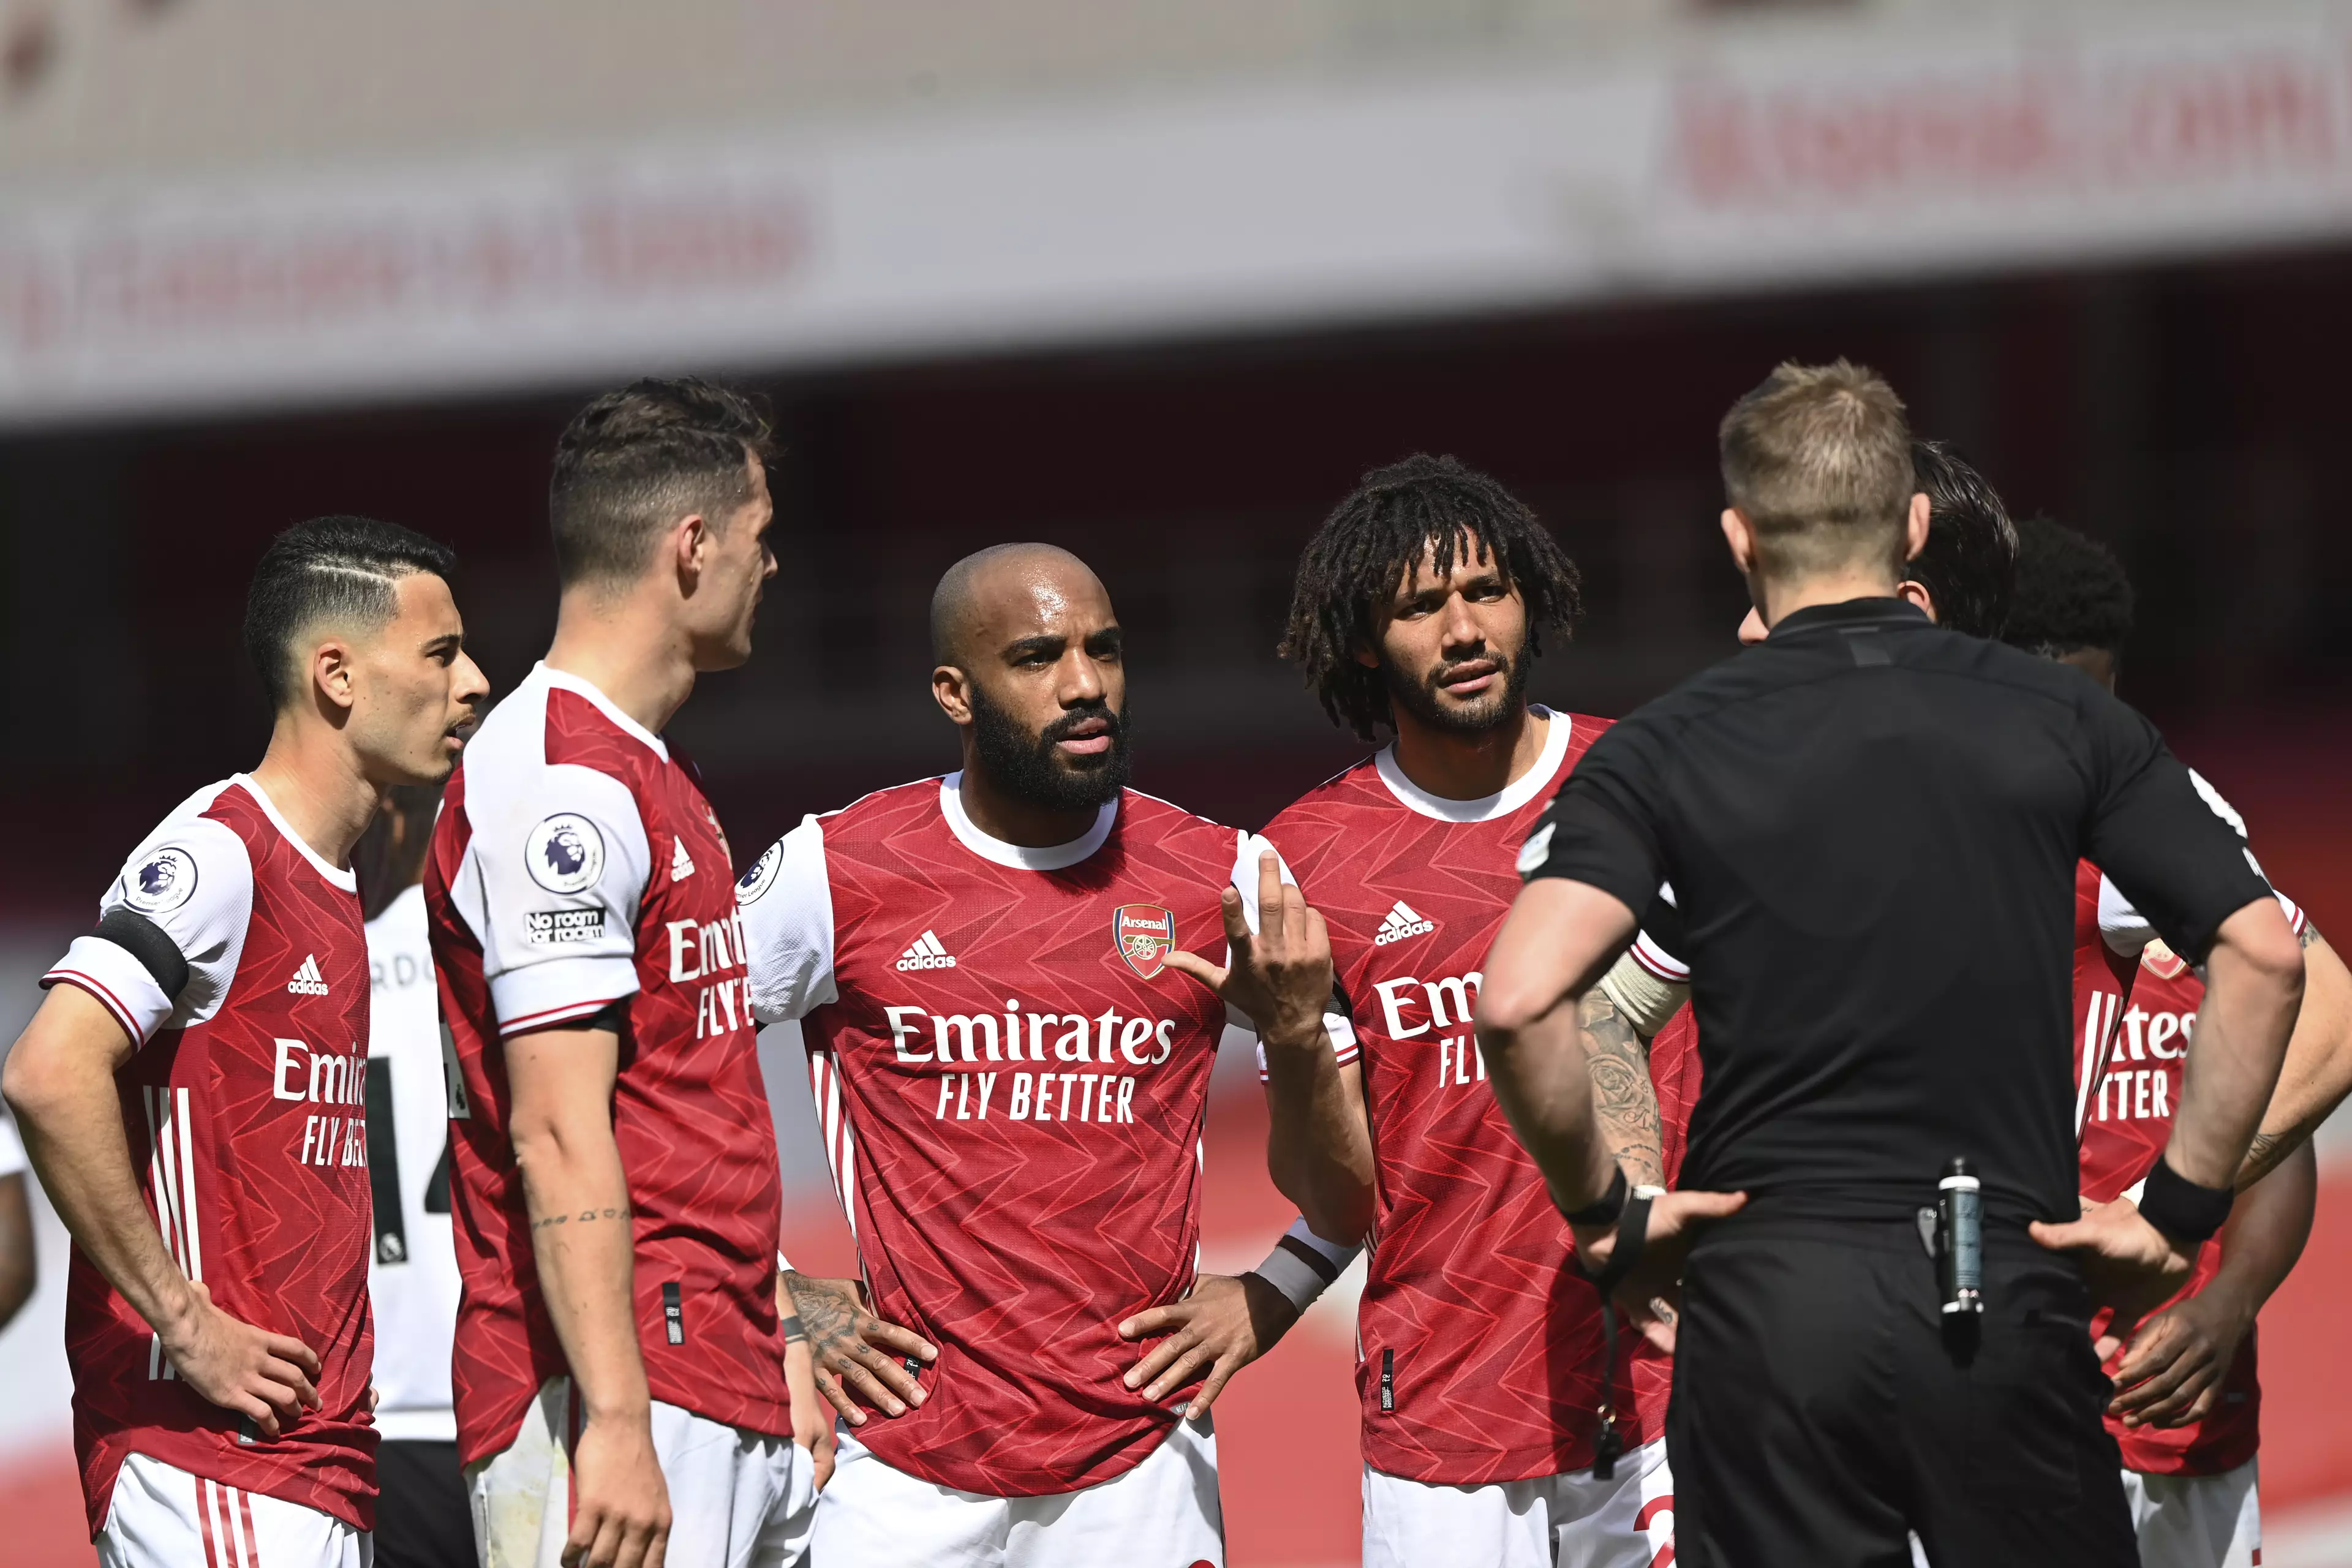 Arsenal trying to imagine their one of Europe's elite after drawing 1-1 with relegation threatened Fulham, and following 17 years without a league title...Image: PA Images